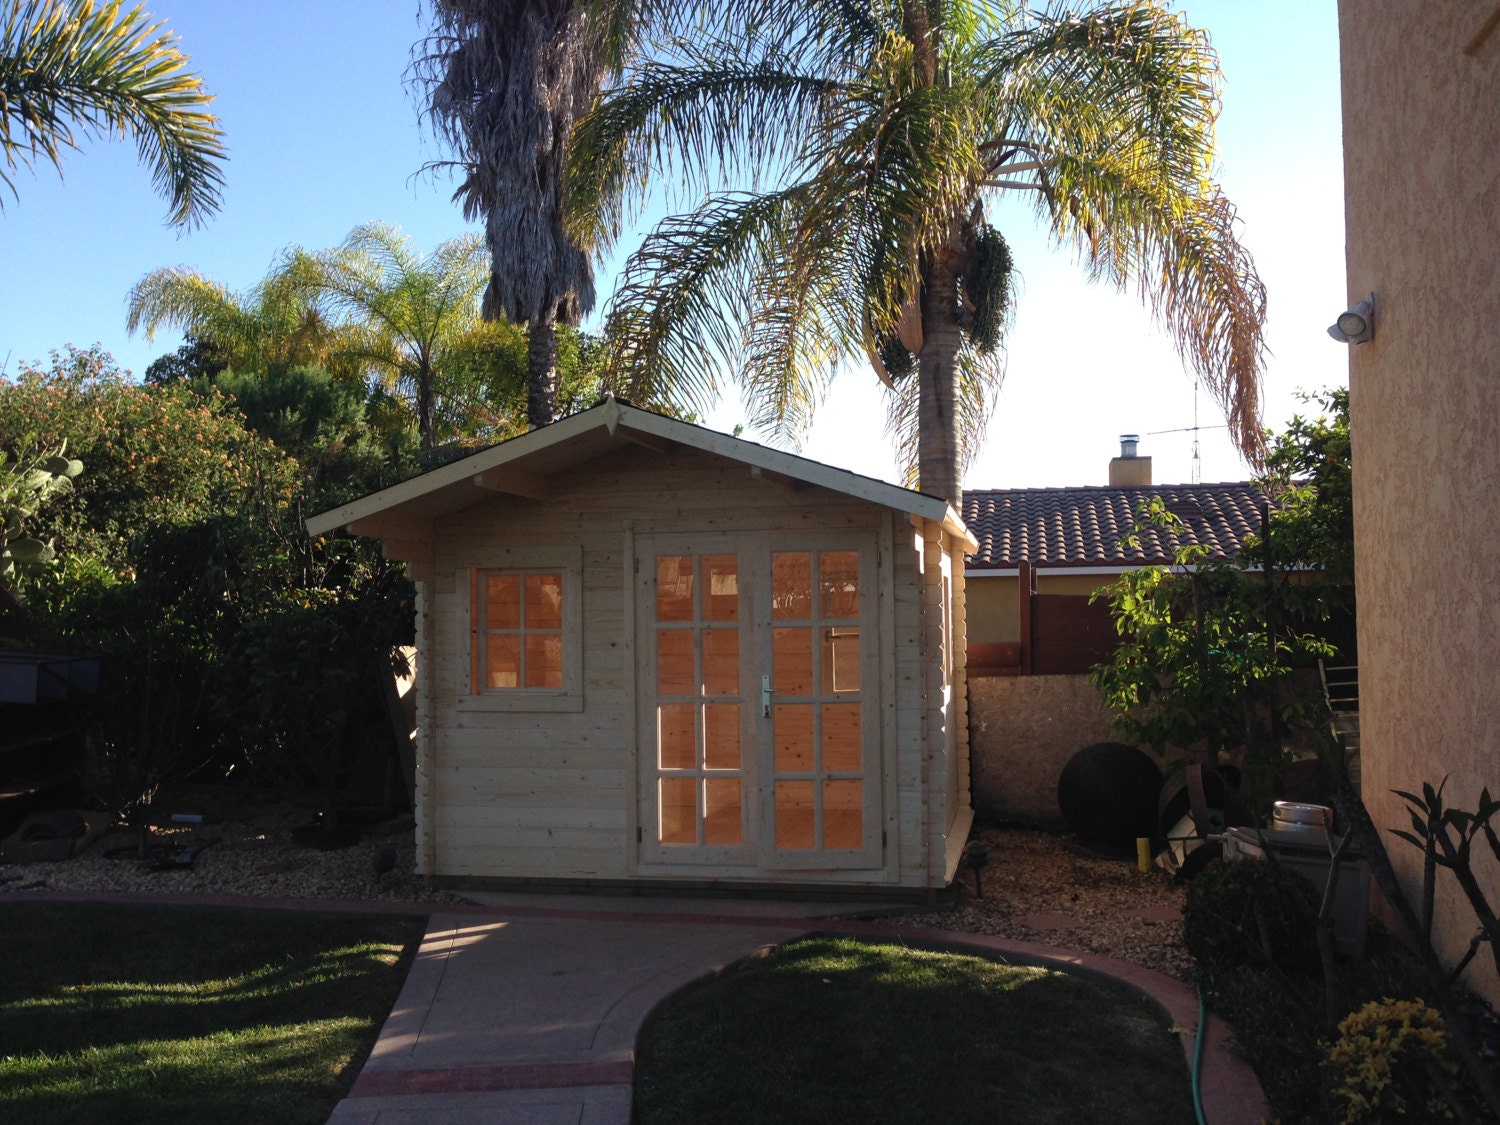 pre made: Guest house storage shed office space pool house